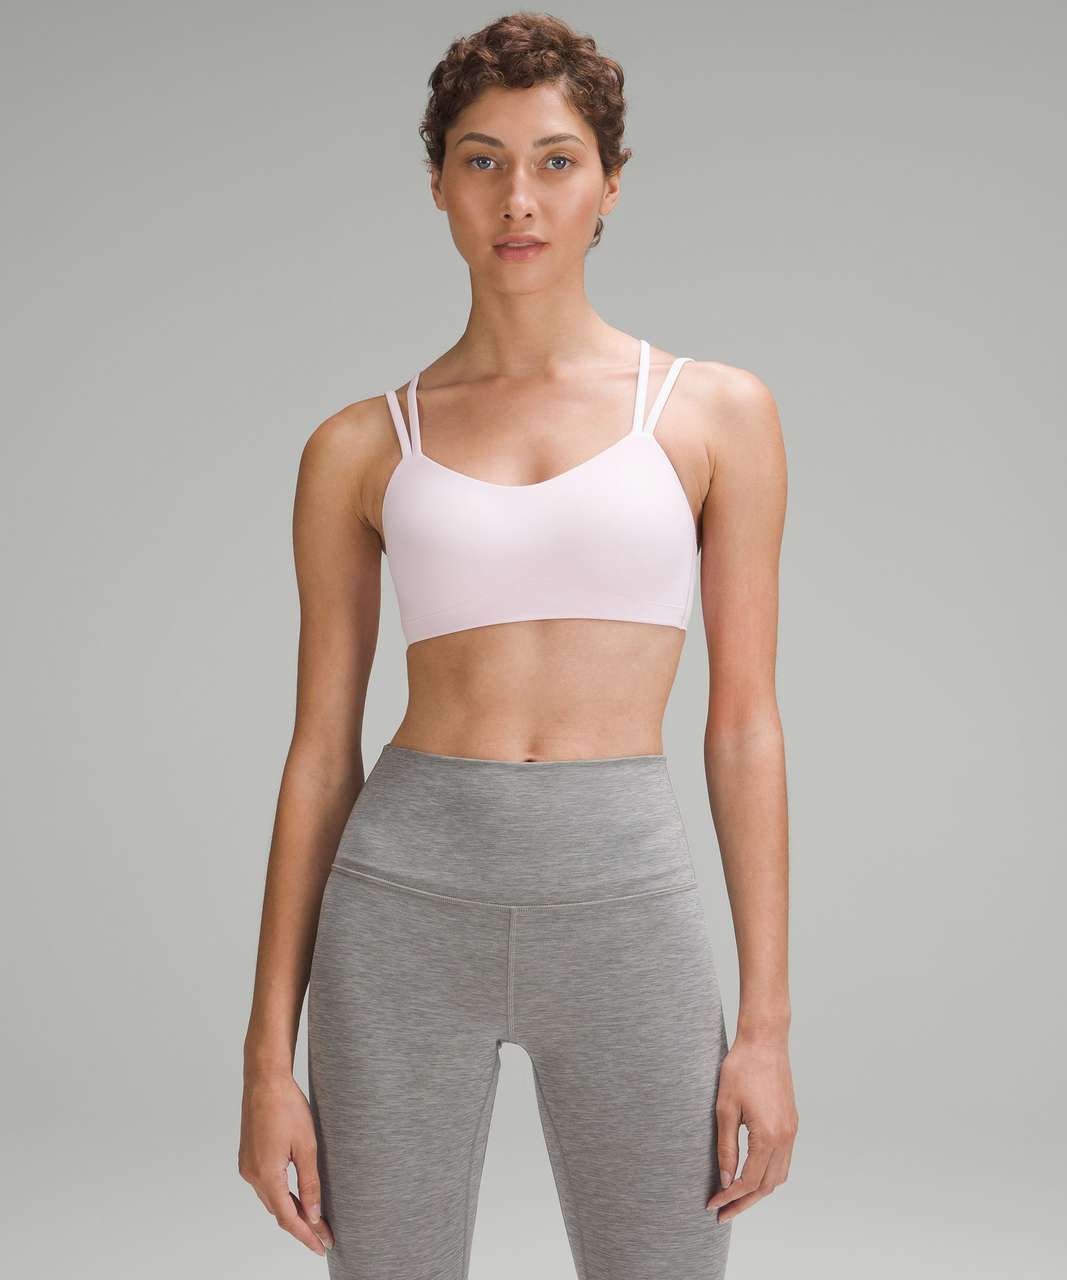 NEW Lululemon Like a Cloud Bra Light Support B/C Cup Sonic Pink Size 4 & 6